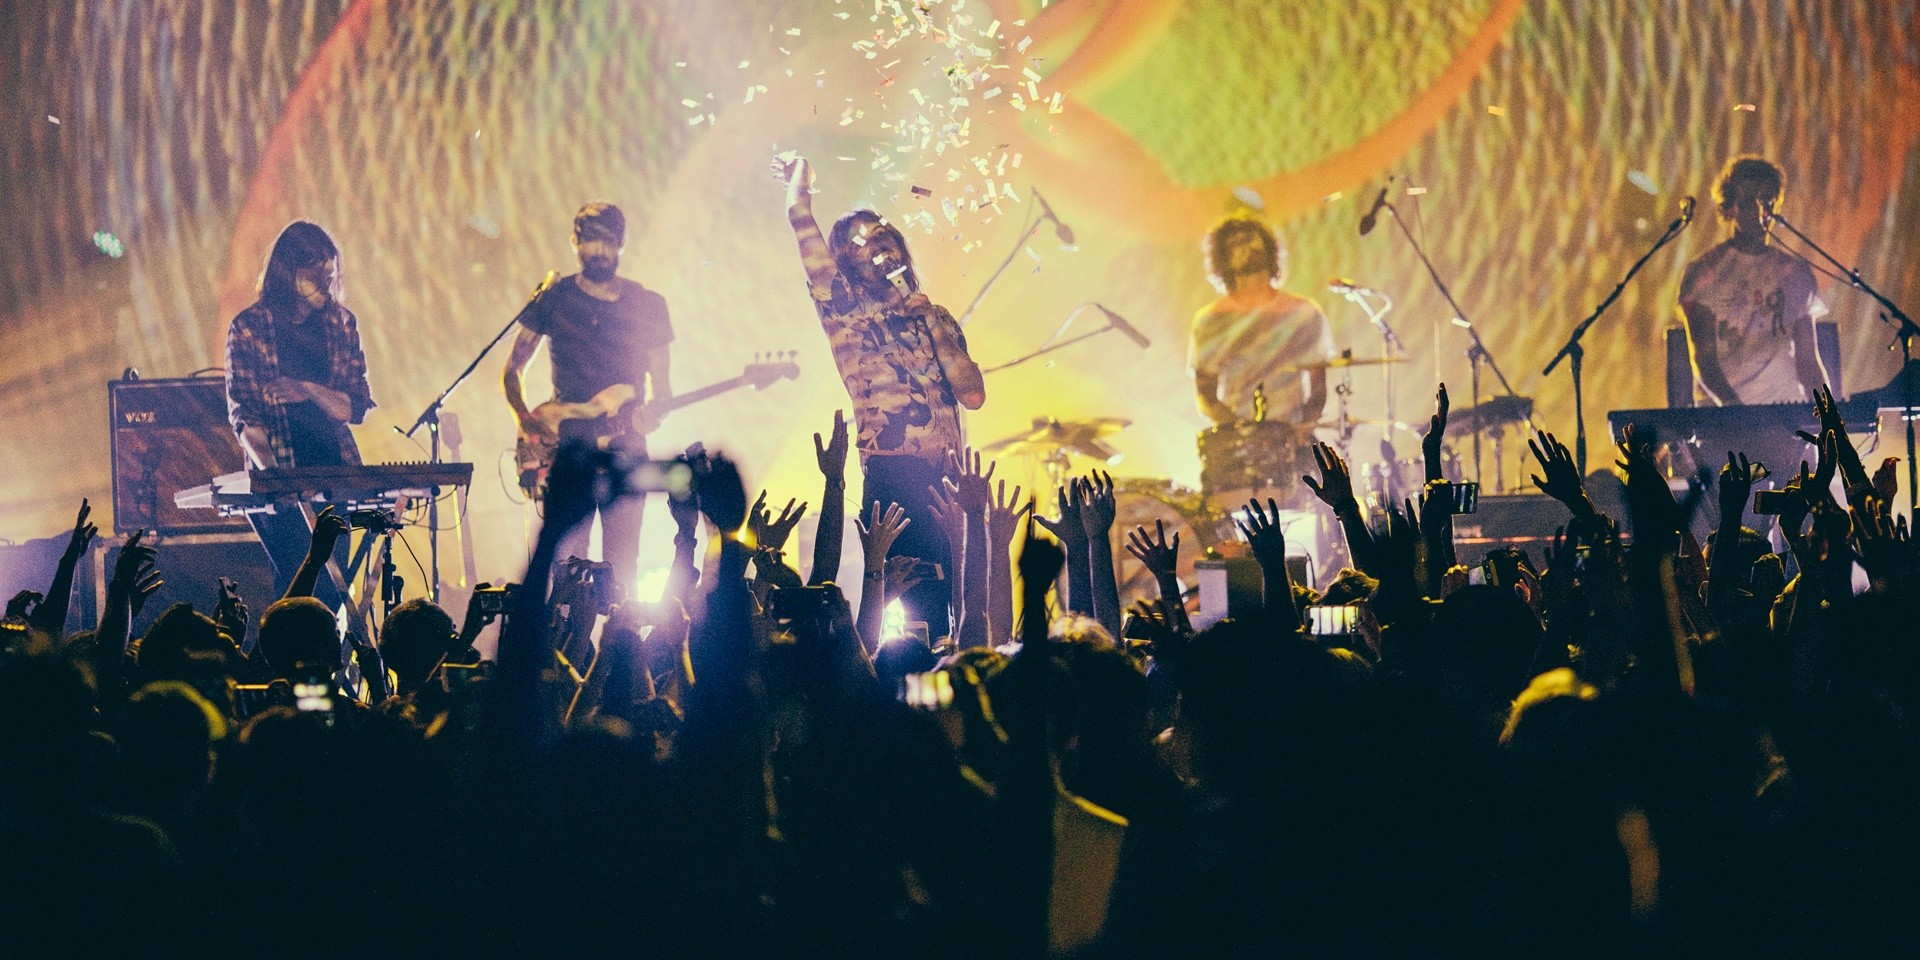 GIG REPORT: Tame Impala turns regal theatre into psychedelic dance floor